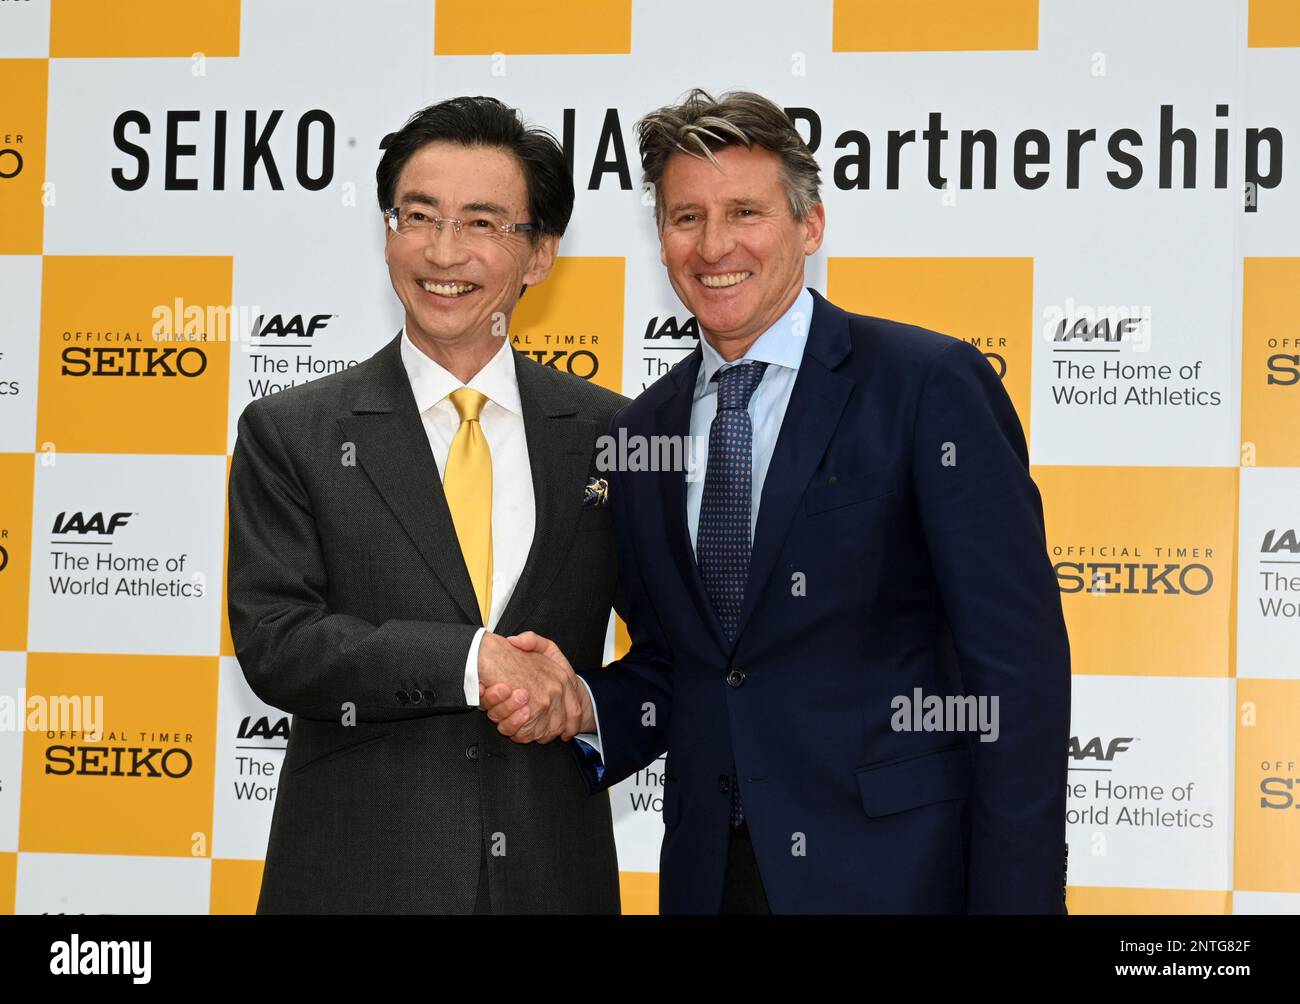 Seiko Holdings Corporatin chairman and group chief executive officer Shinji  Hattori (left) and IAAF president Sebastian Coe shake hands during a news  conference prior to the IAAF World Relays, Friday, May 10,